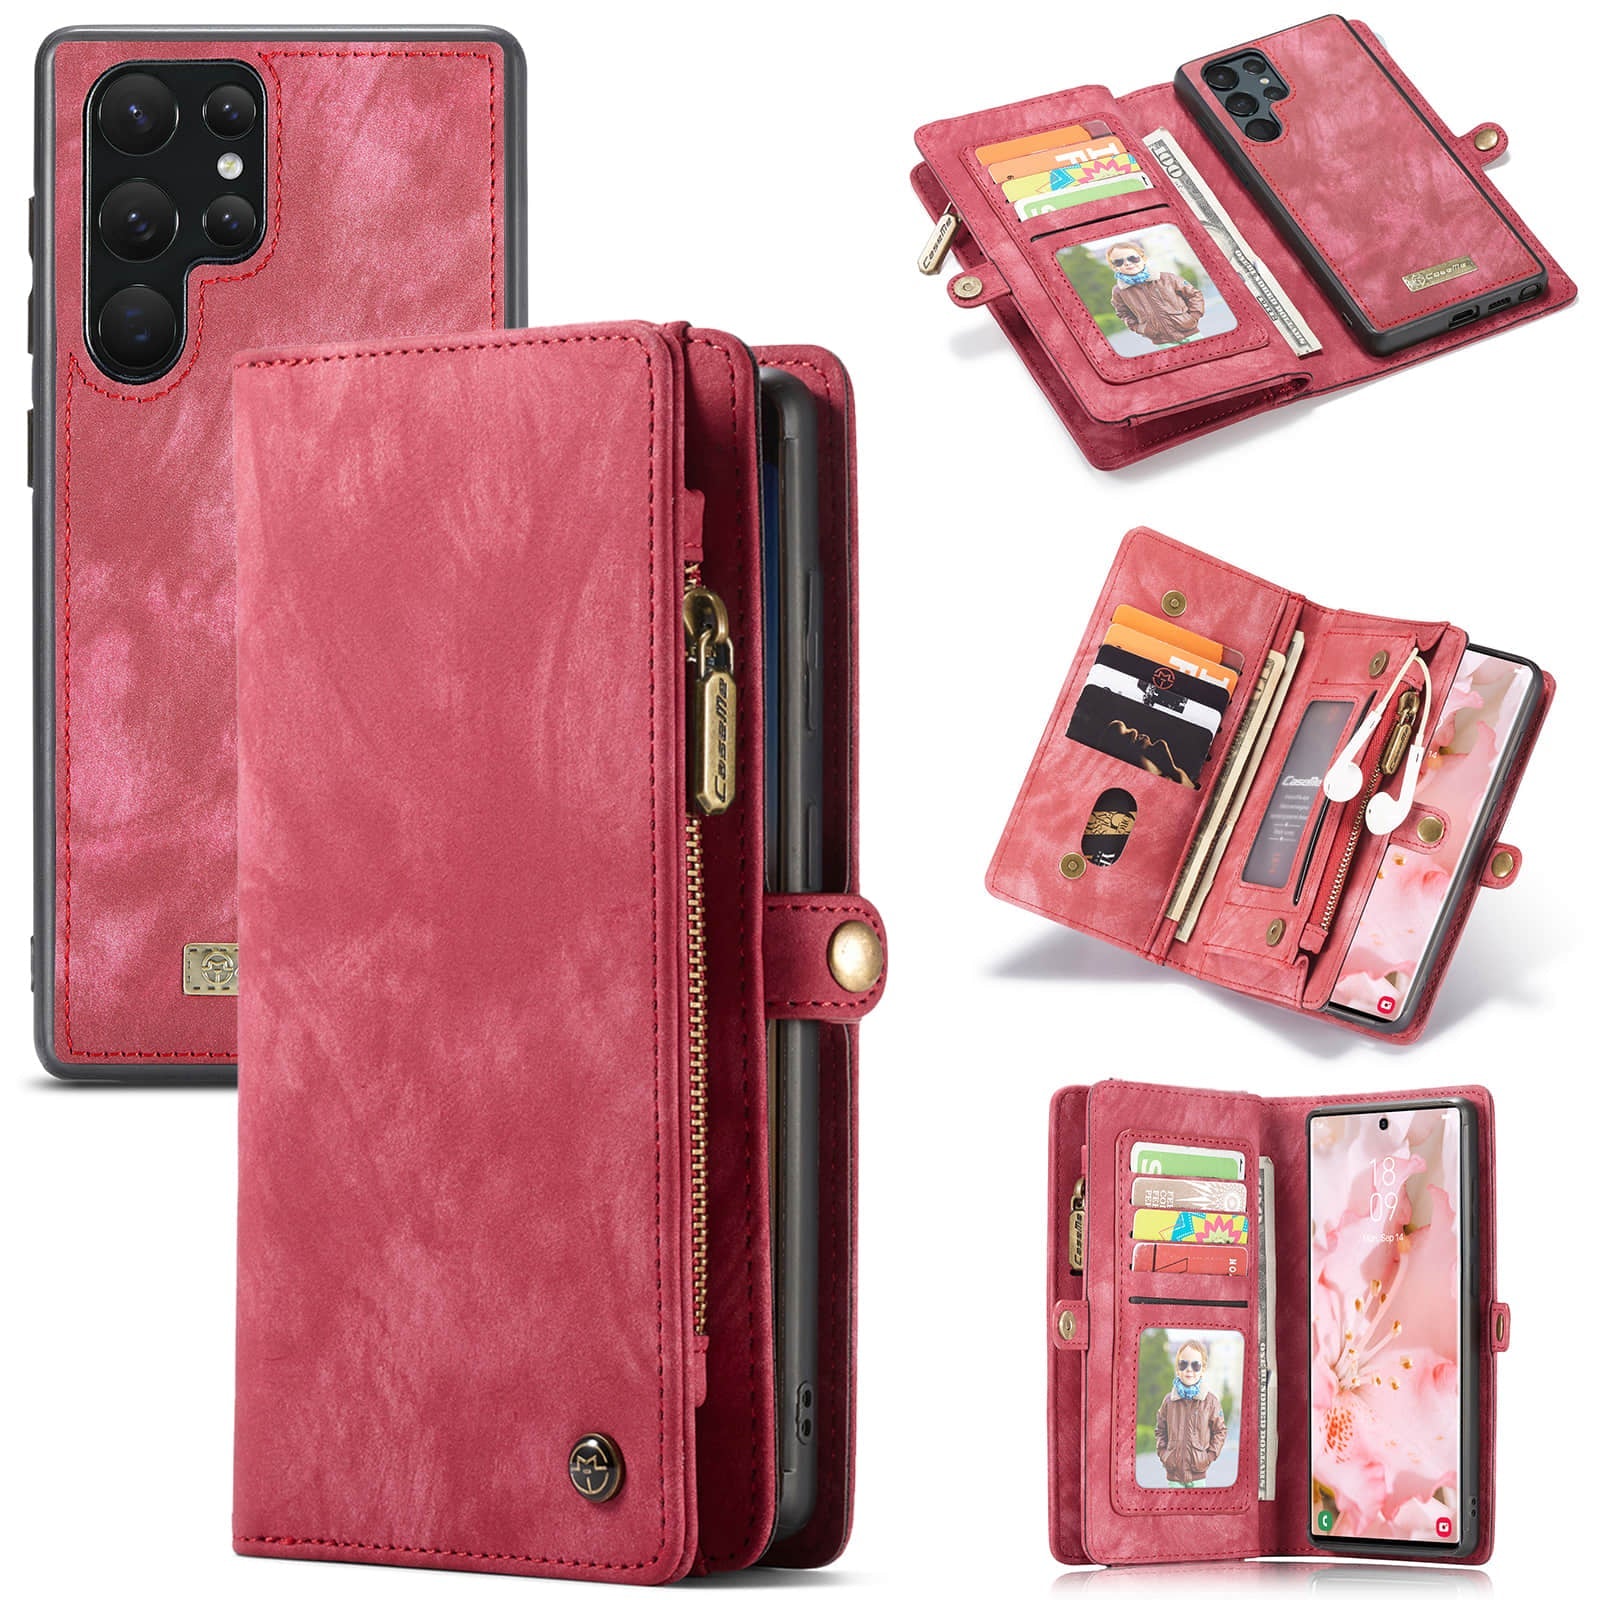 Caeouts Zipper Wallet PU Leather Case Red